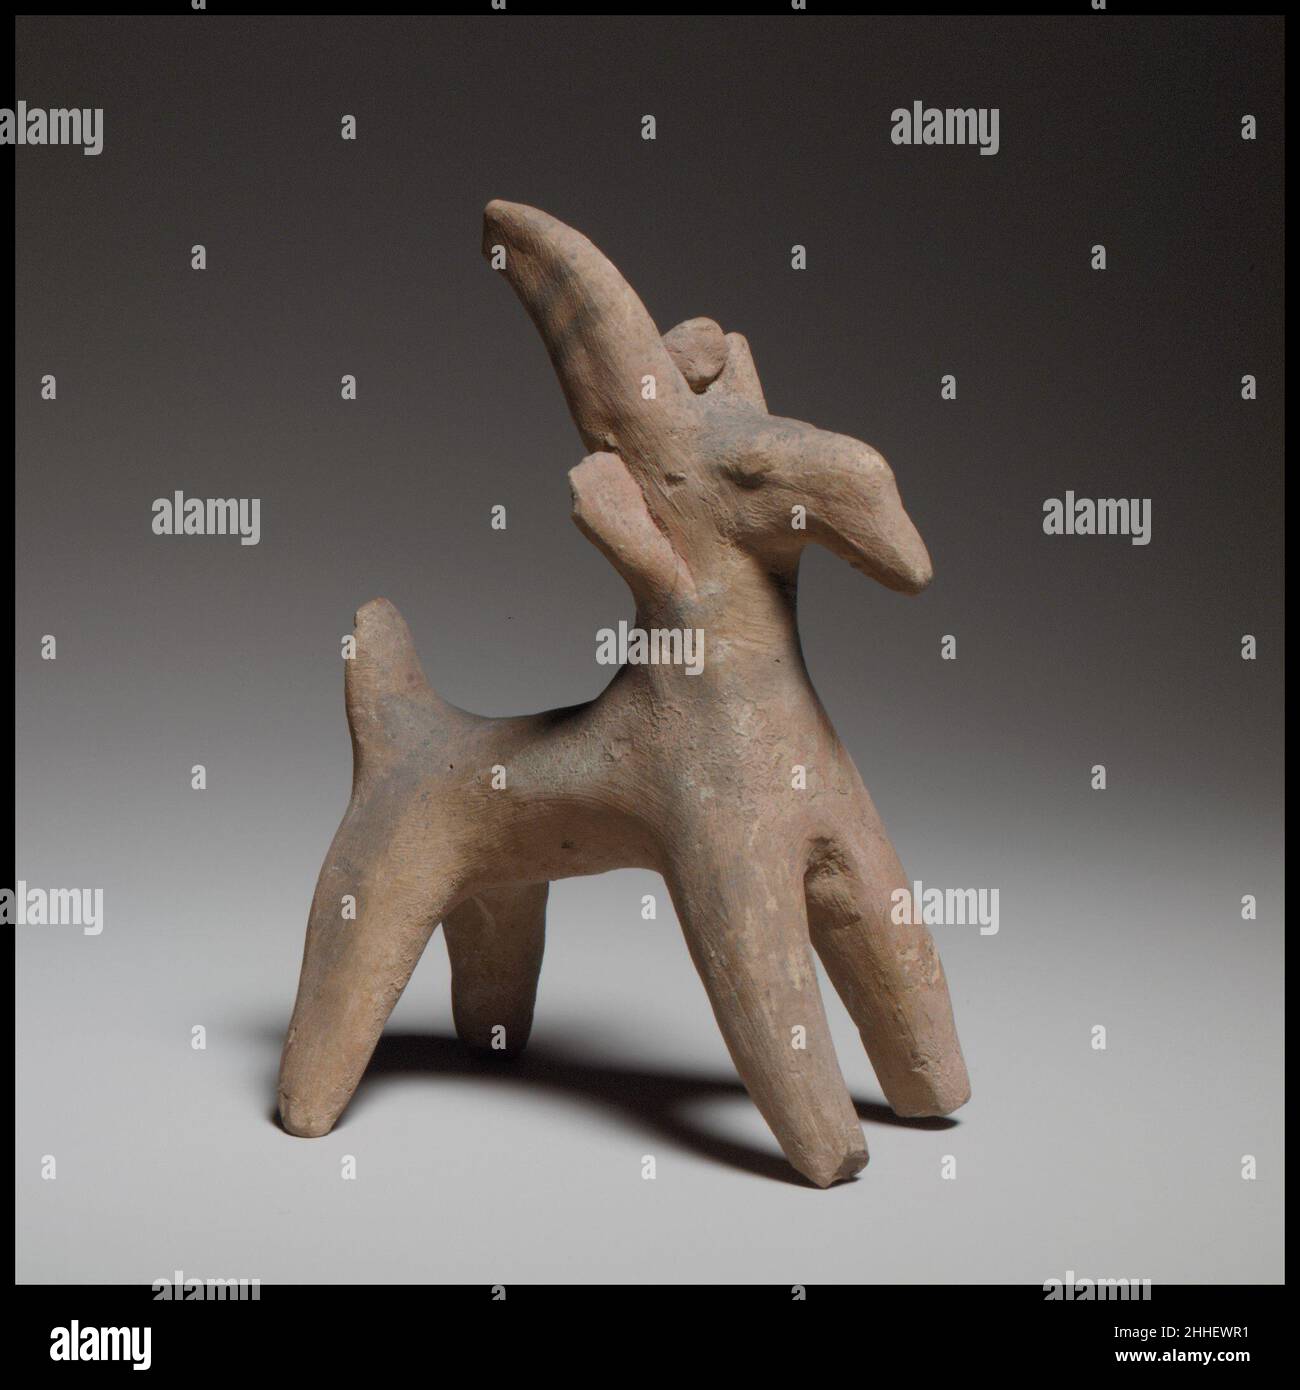 Goat figurine ca. 600–480 B.C. Cypriot The figurine is handmade and solid. It has a cylindrical body, a flat upright tail, long horns that curve backward, pellet ears, a protuberant nose, a pointed muzzle, and bulging eyes.. Goat figurine  241319 Stock Photo